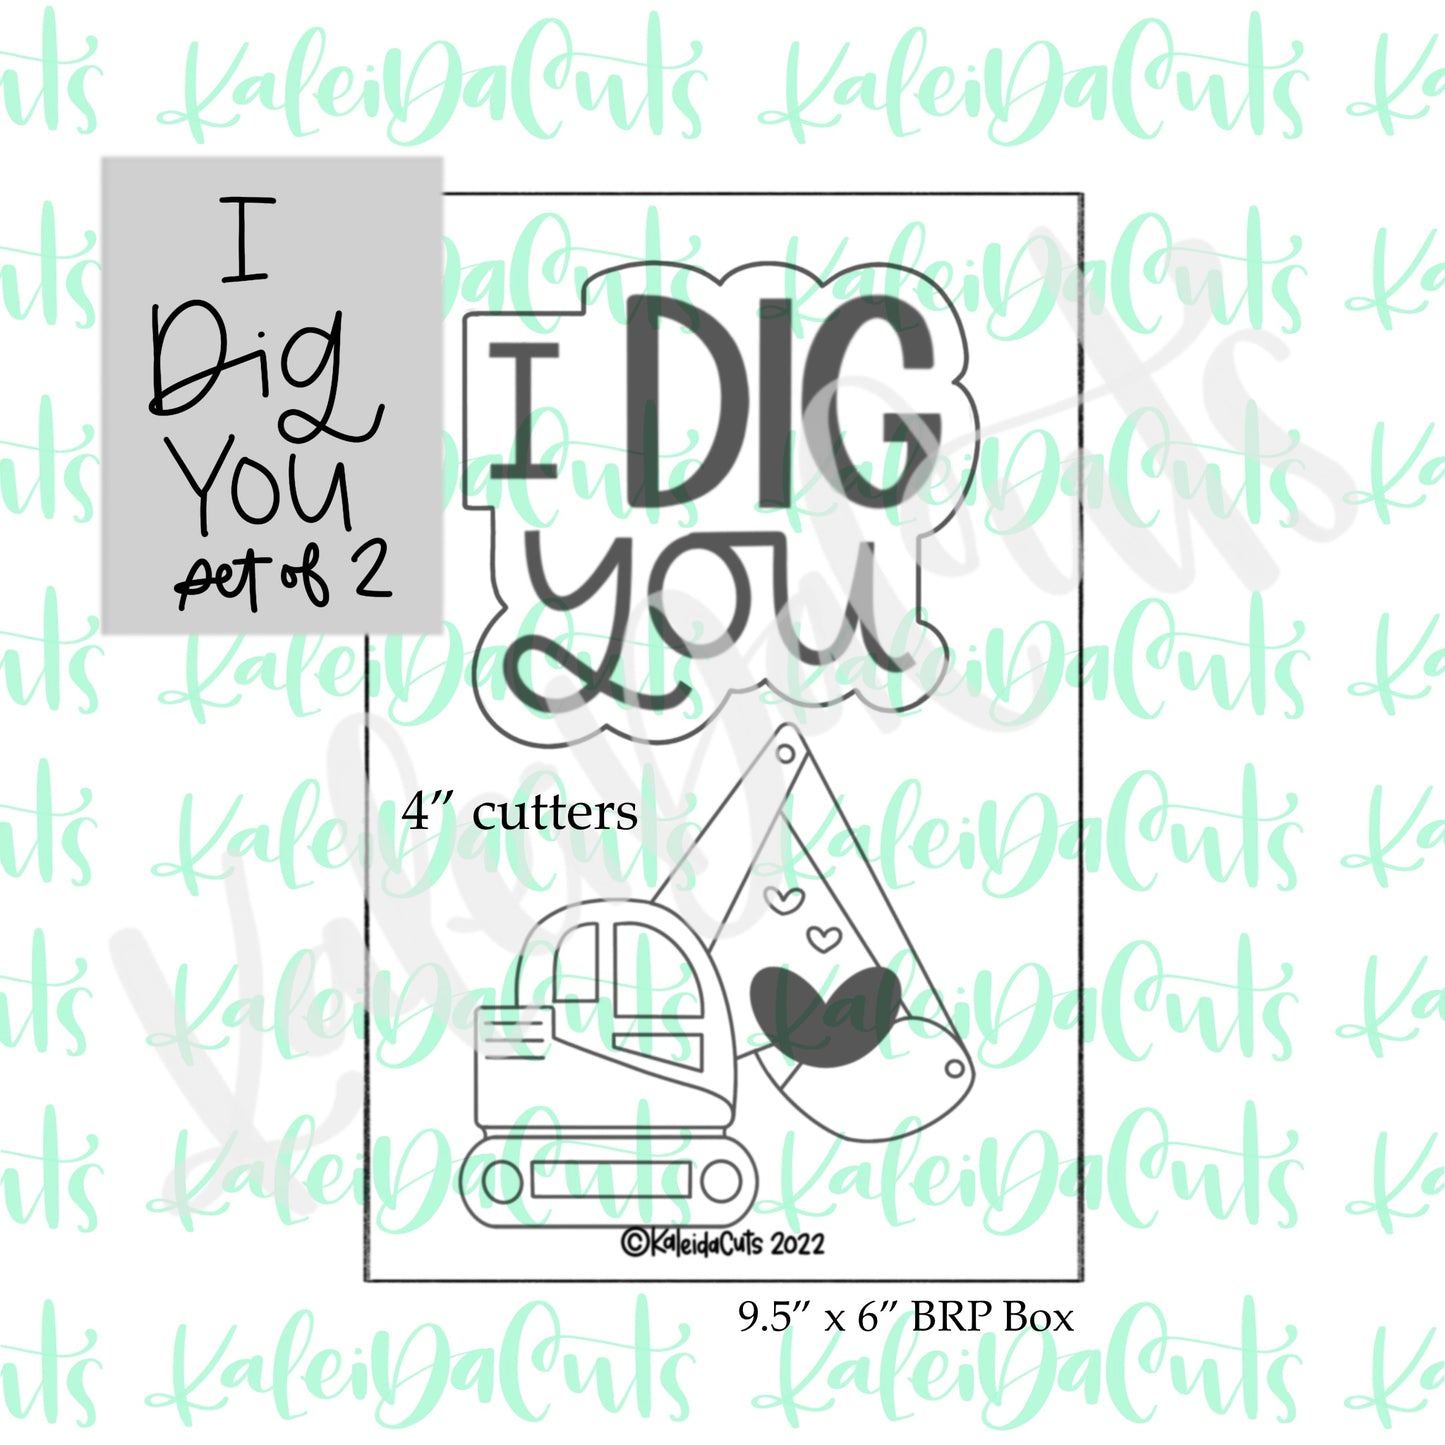 I Dig You Set of 2 Cookie Cutters